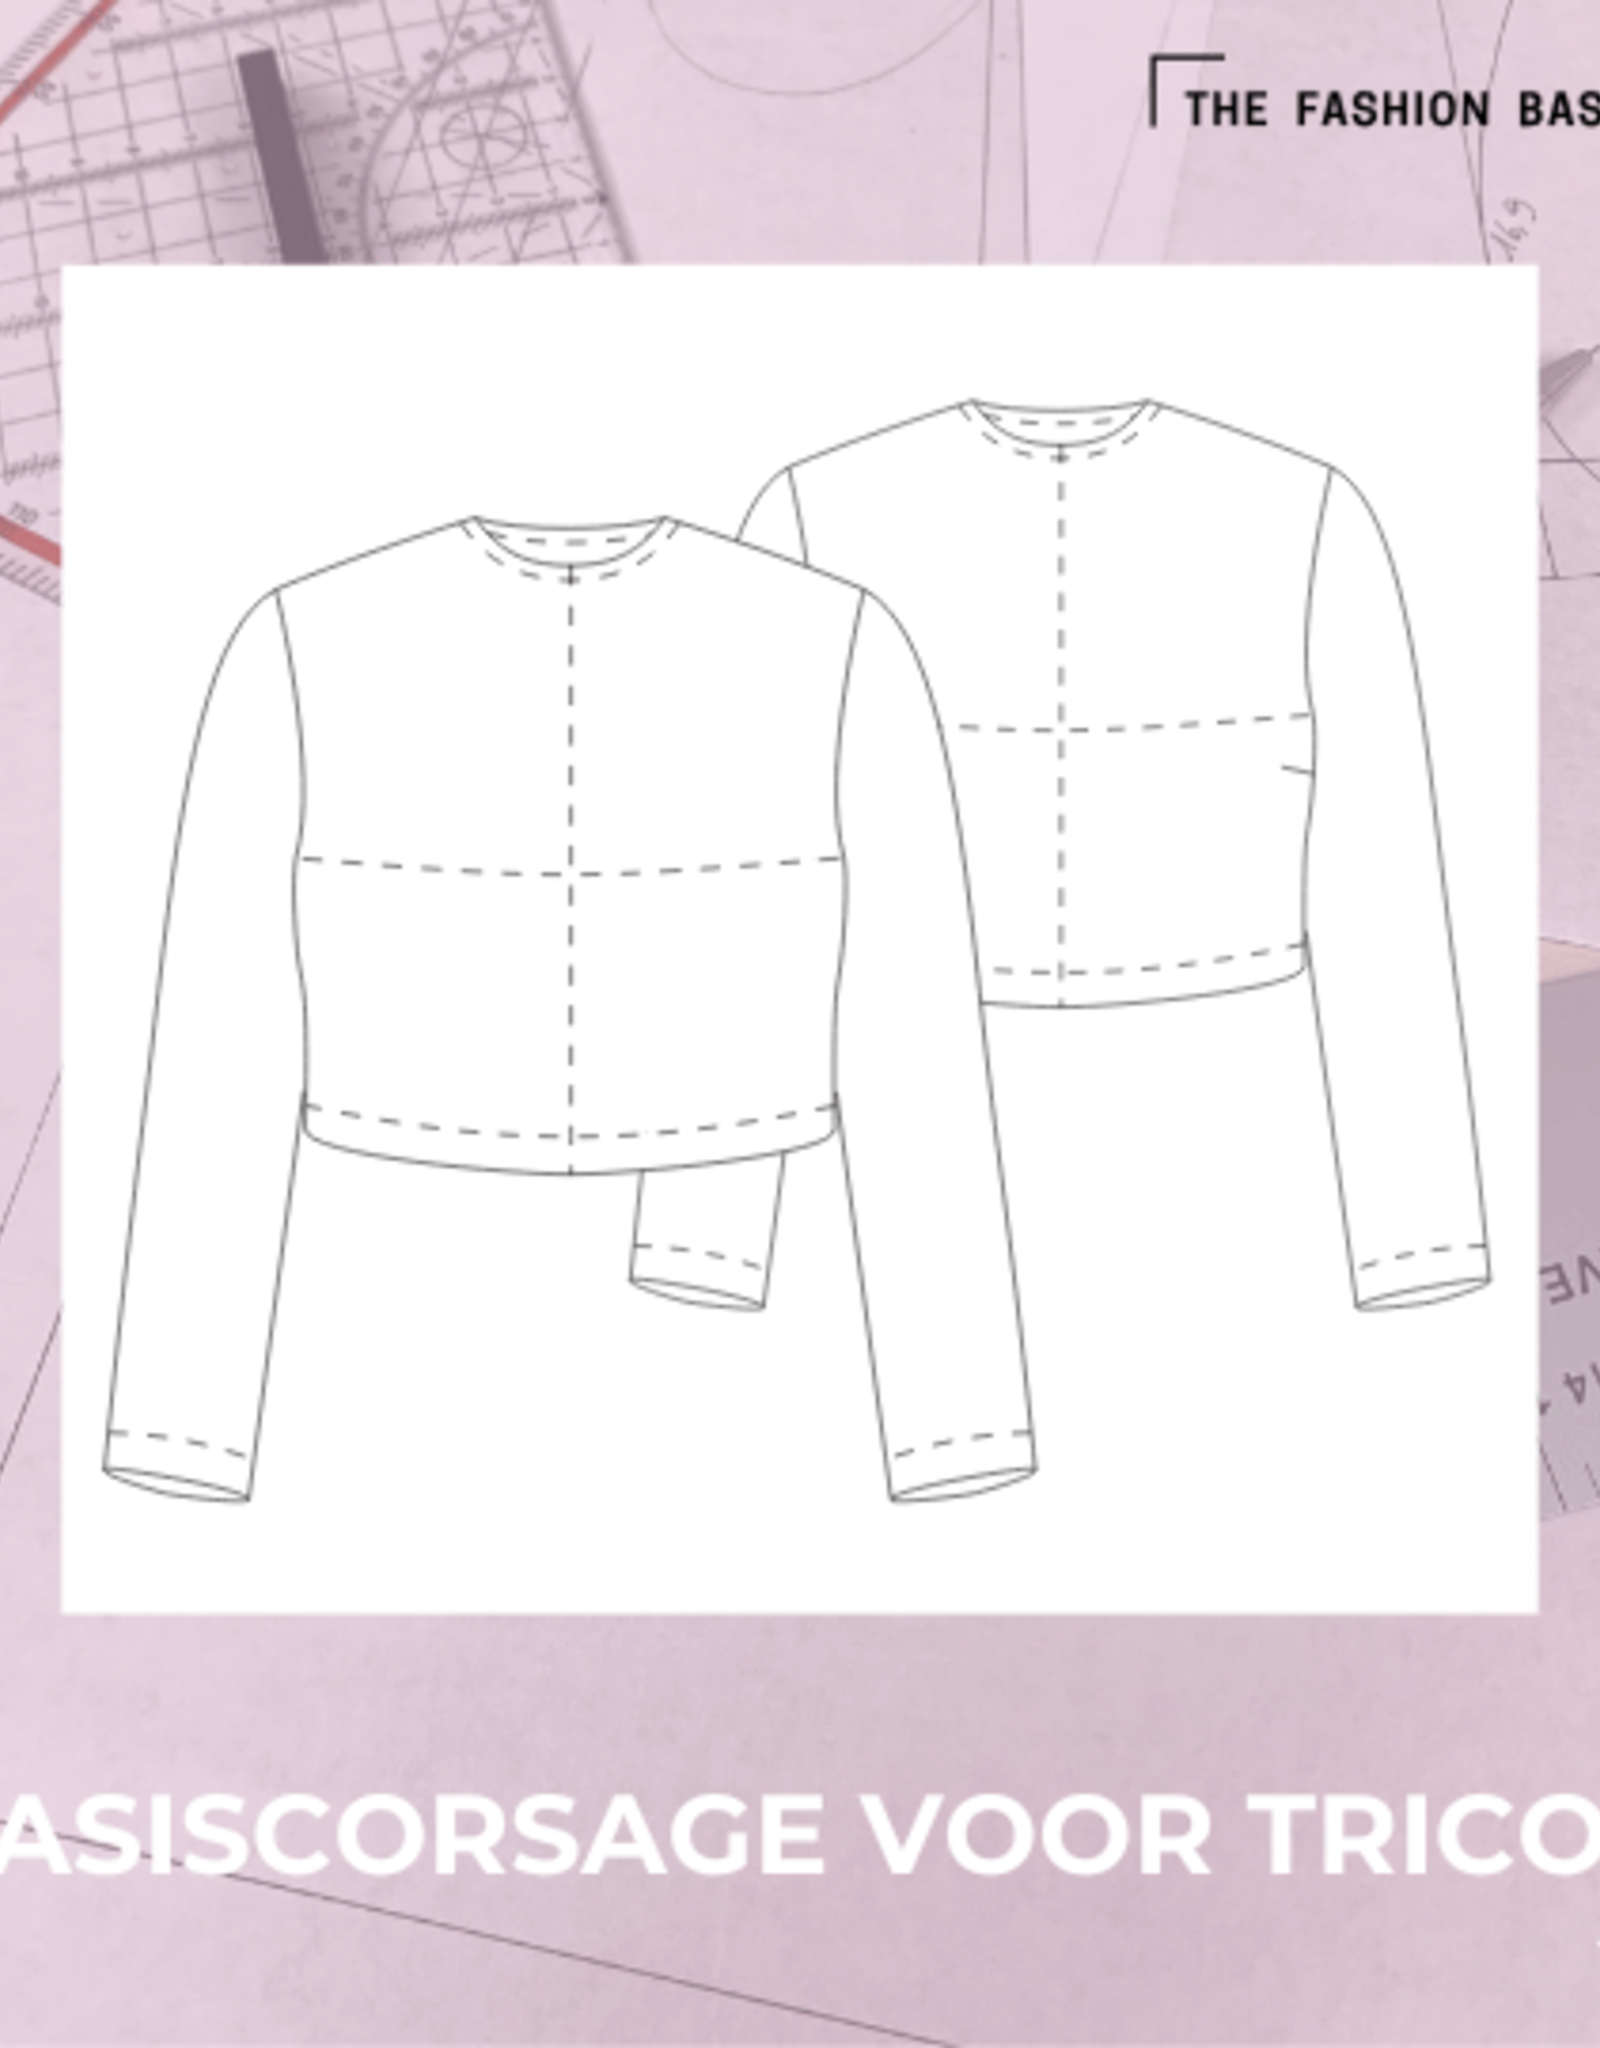 The Fashion Basement Basiscorsage  voor tricot 34-46